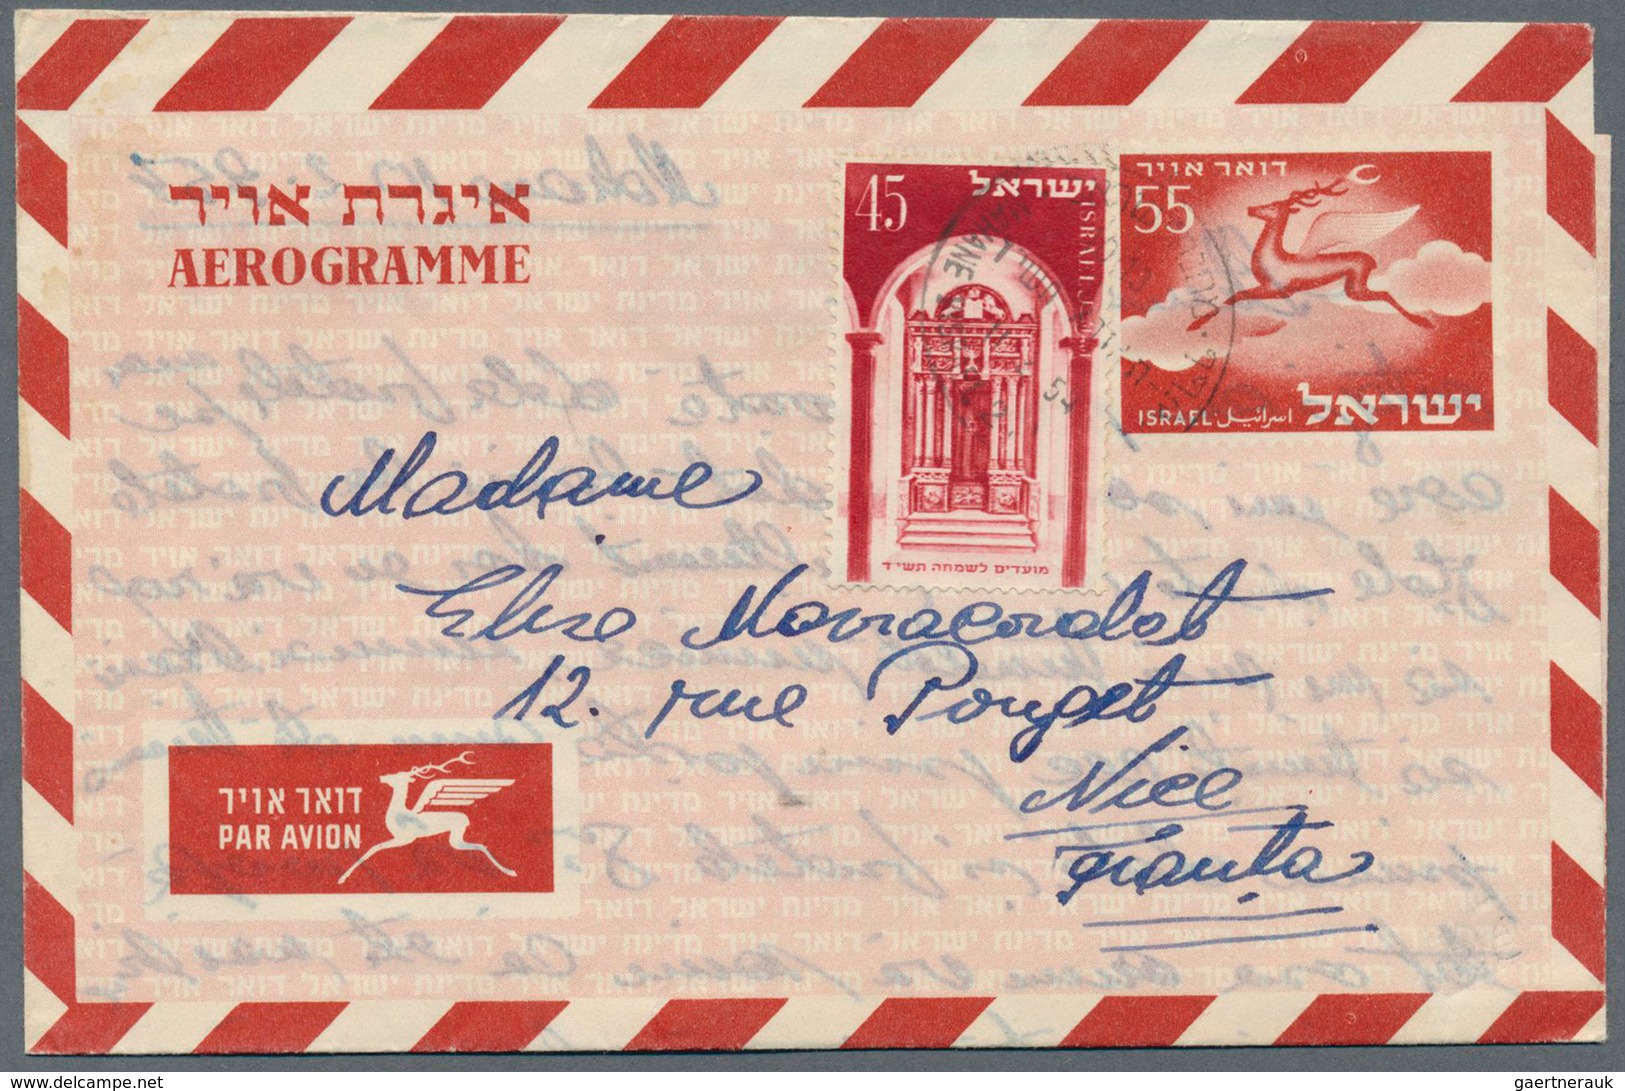 Israel: 1951/1990 (ca.), AEROGRAMMES: Accumulation With About 650 Commercially Used Aerogrammes With - Ungebraucht (mit Tabs)